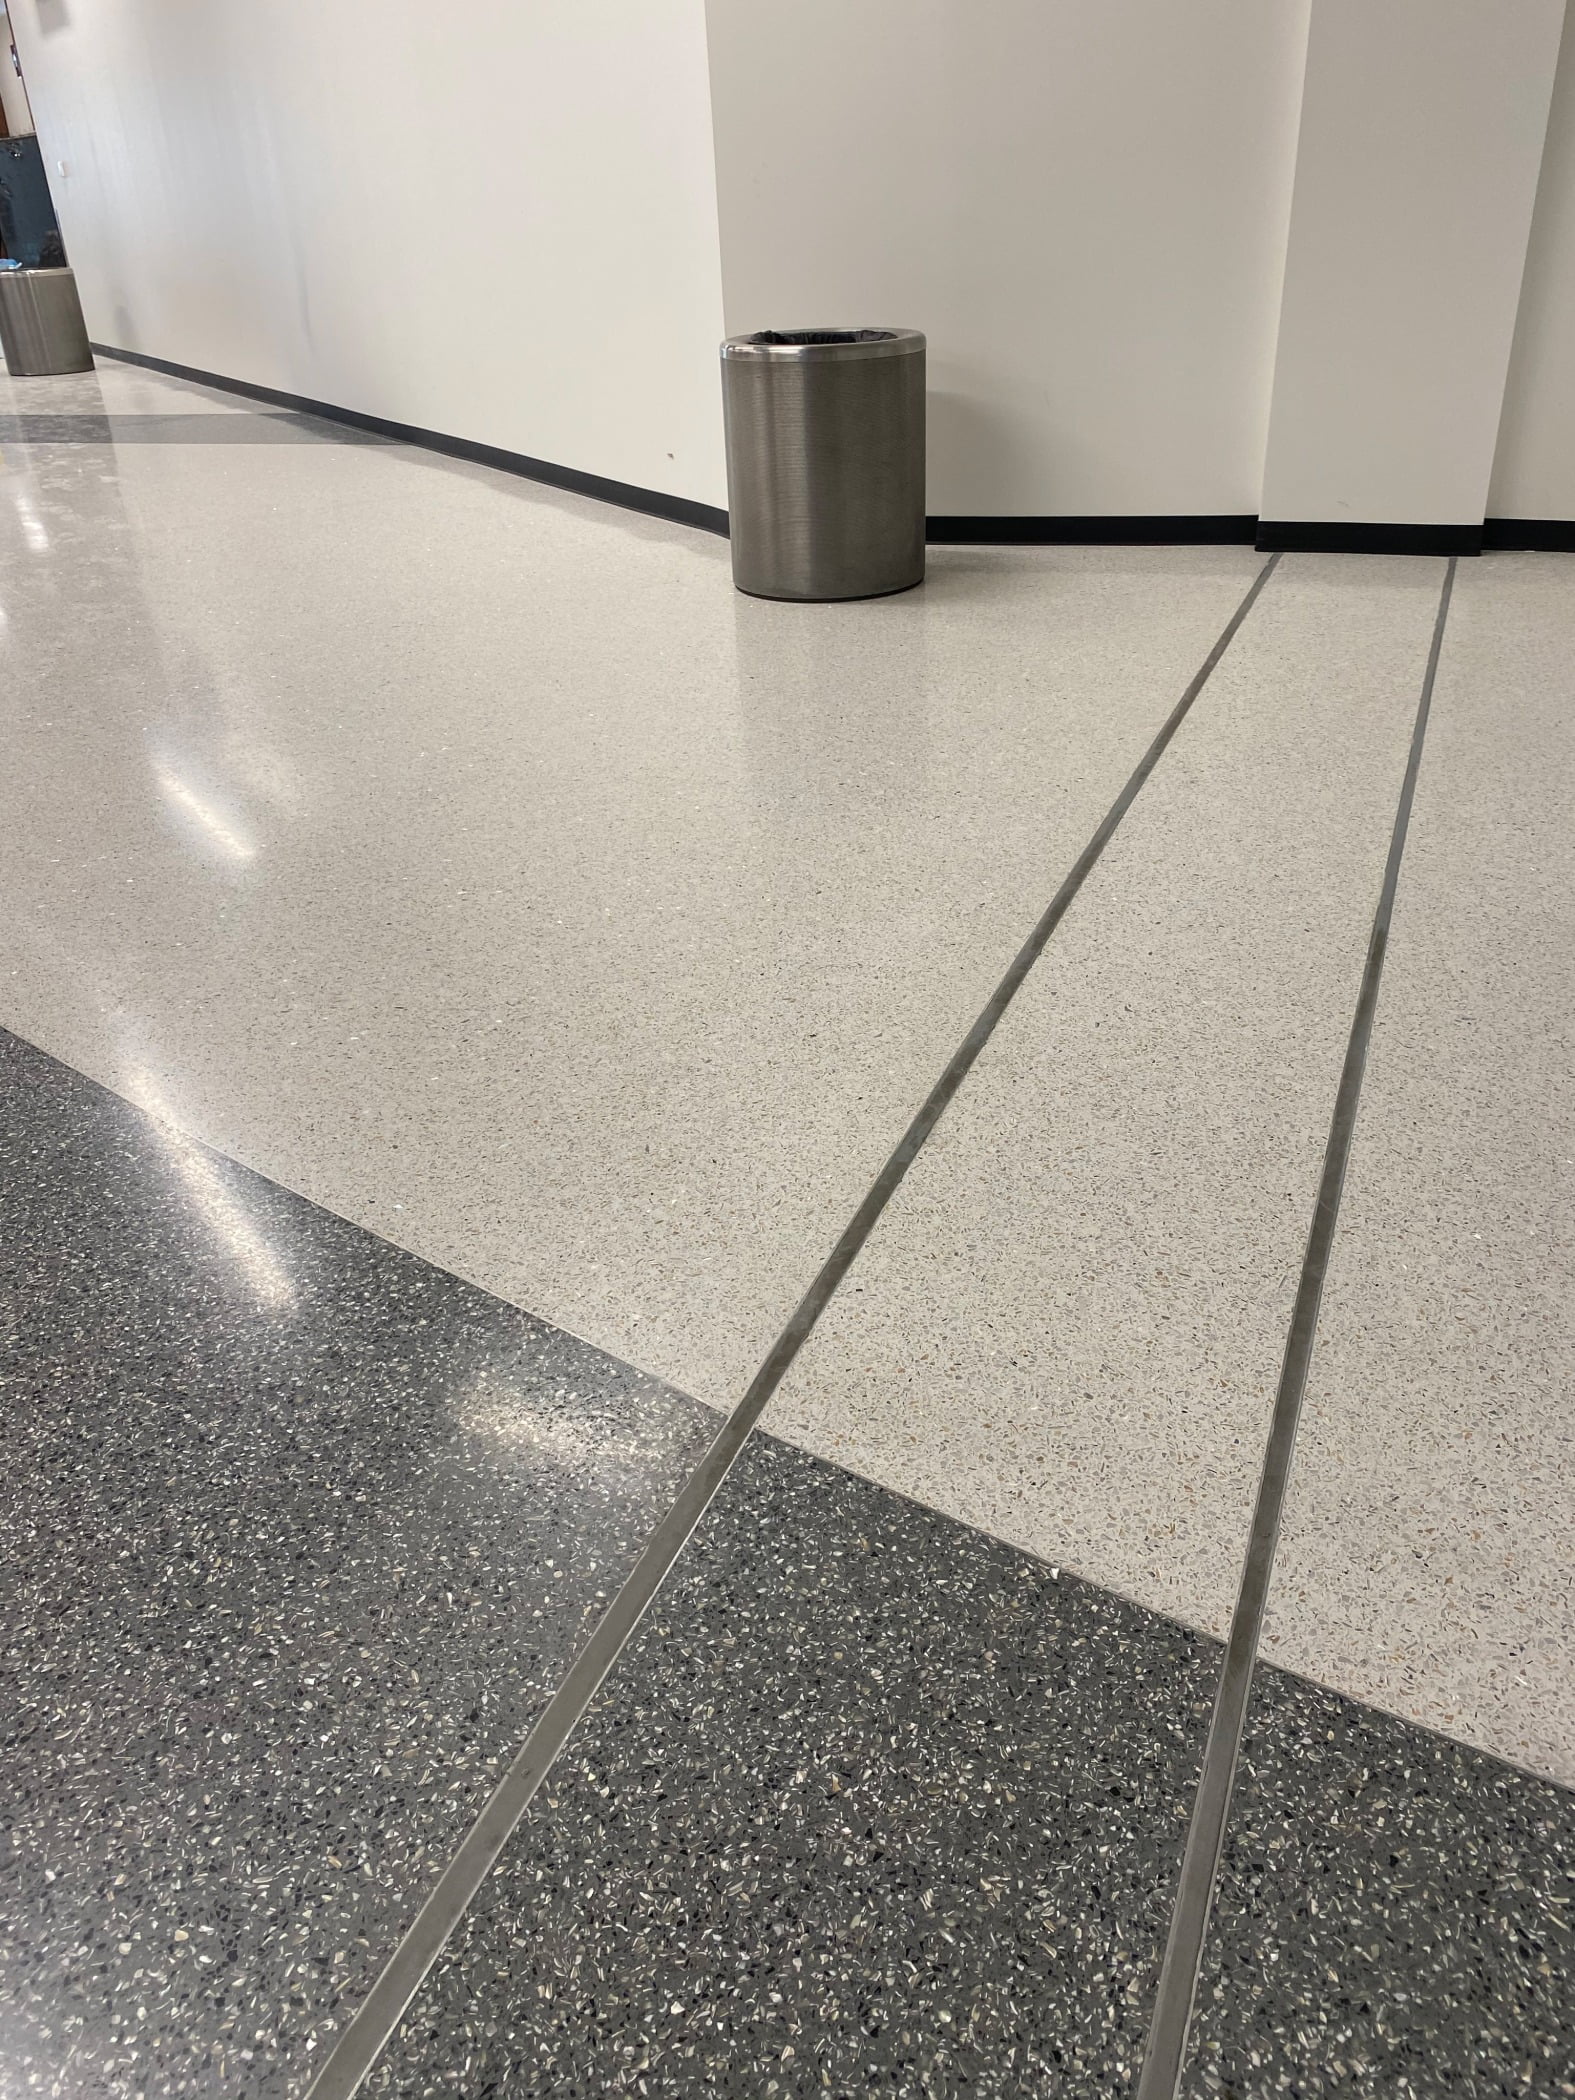 Balcos floor expansion joint covers incorporate the same finished Terrazzo as the surrounding floor for a smooth surface transition that meets ADA guidelines for slip resistance.